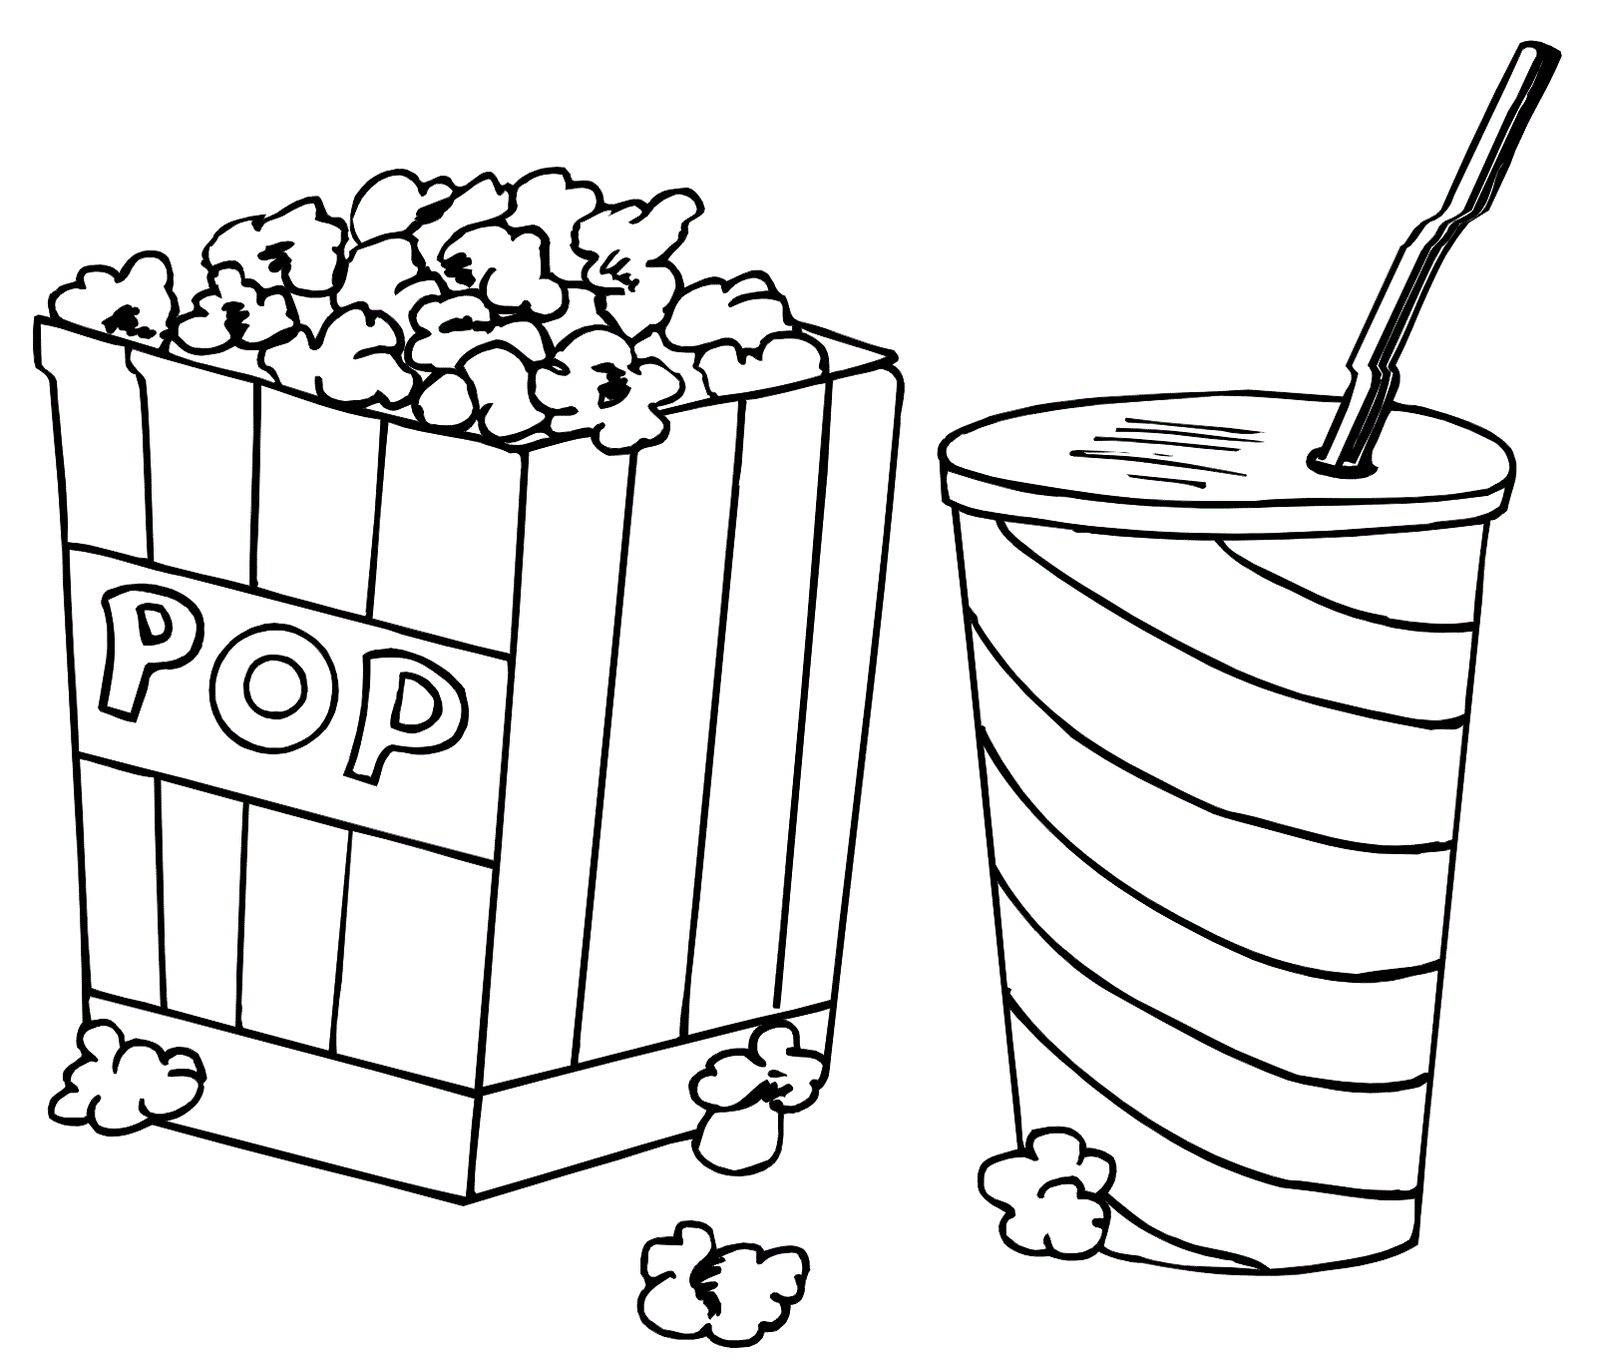 pop corn and drink coloring sheet